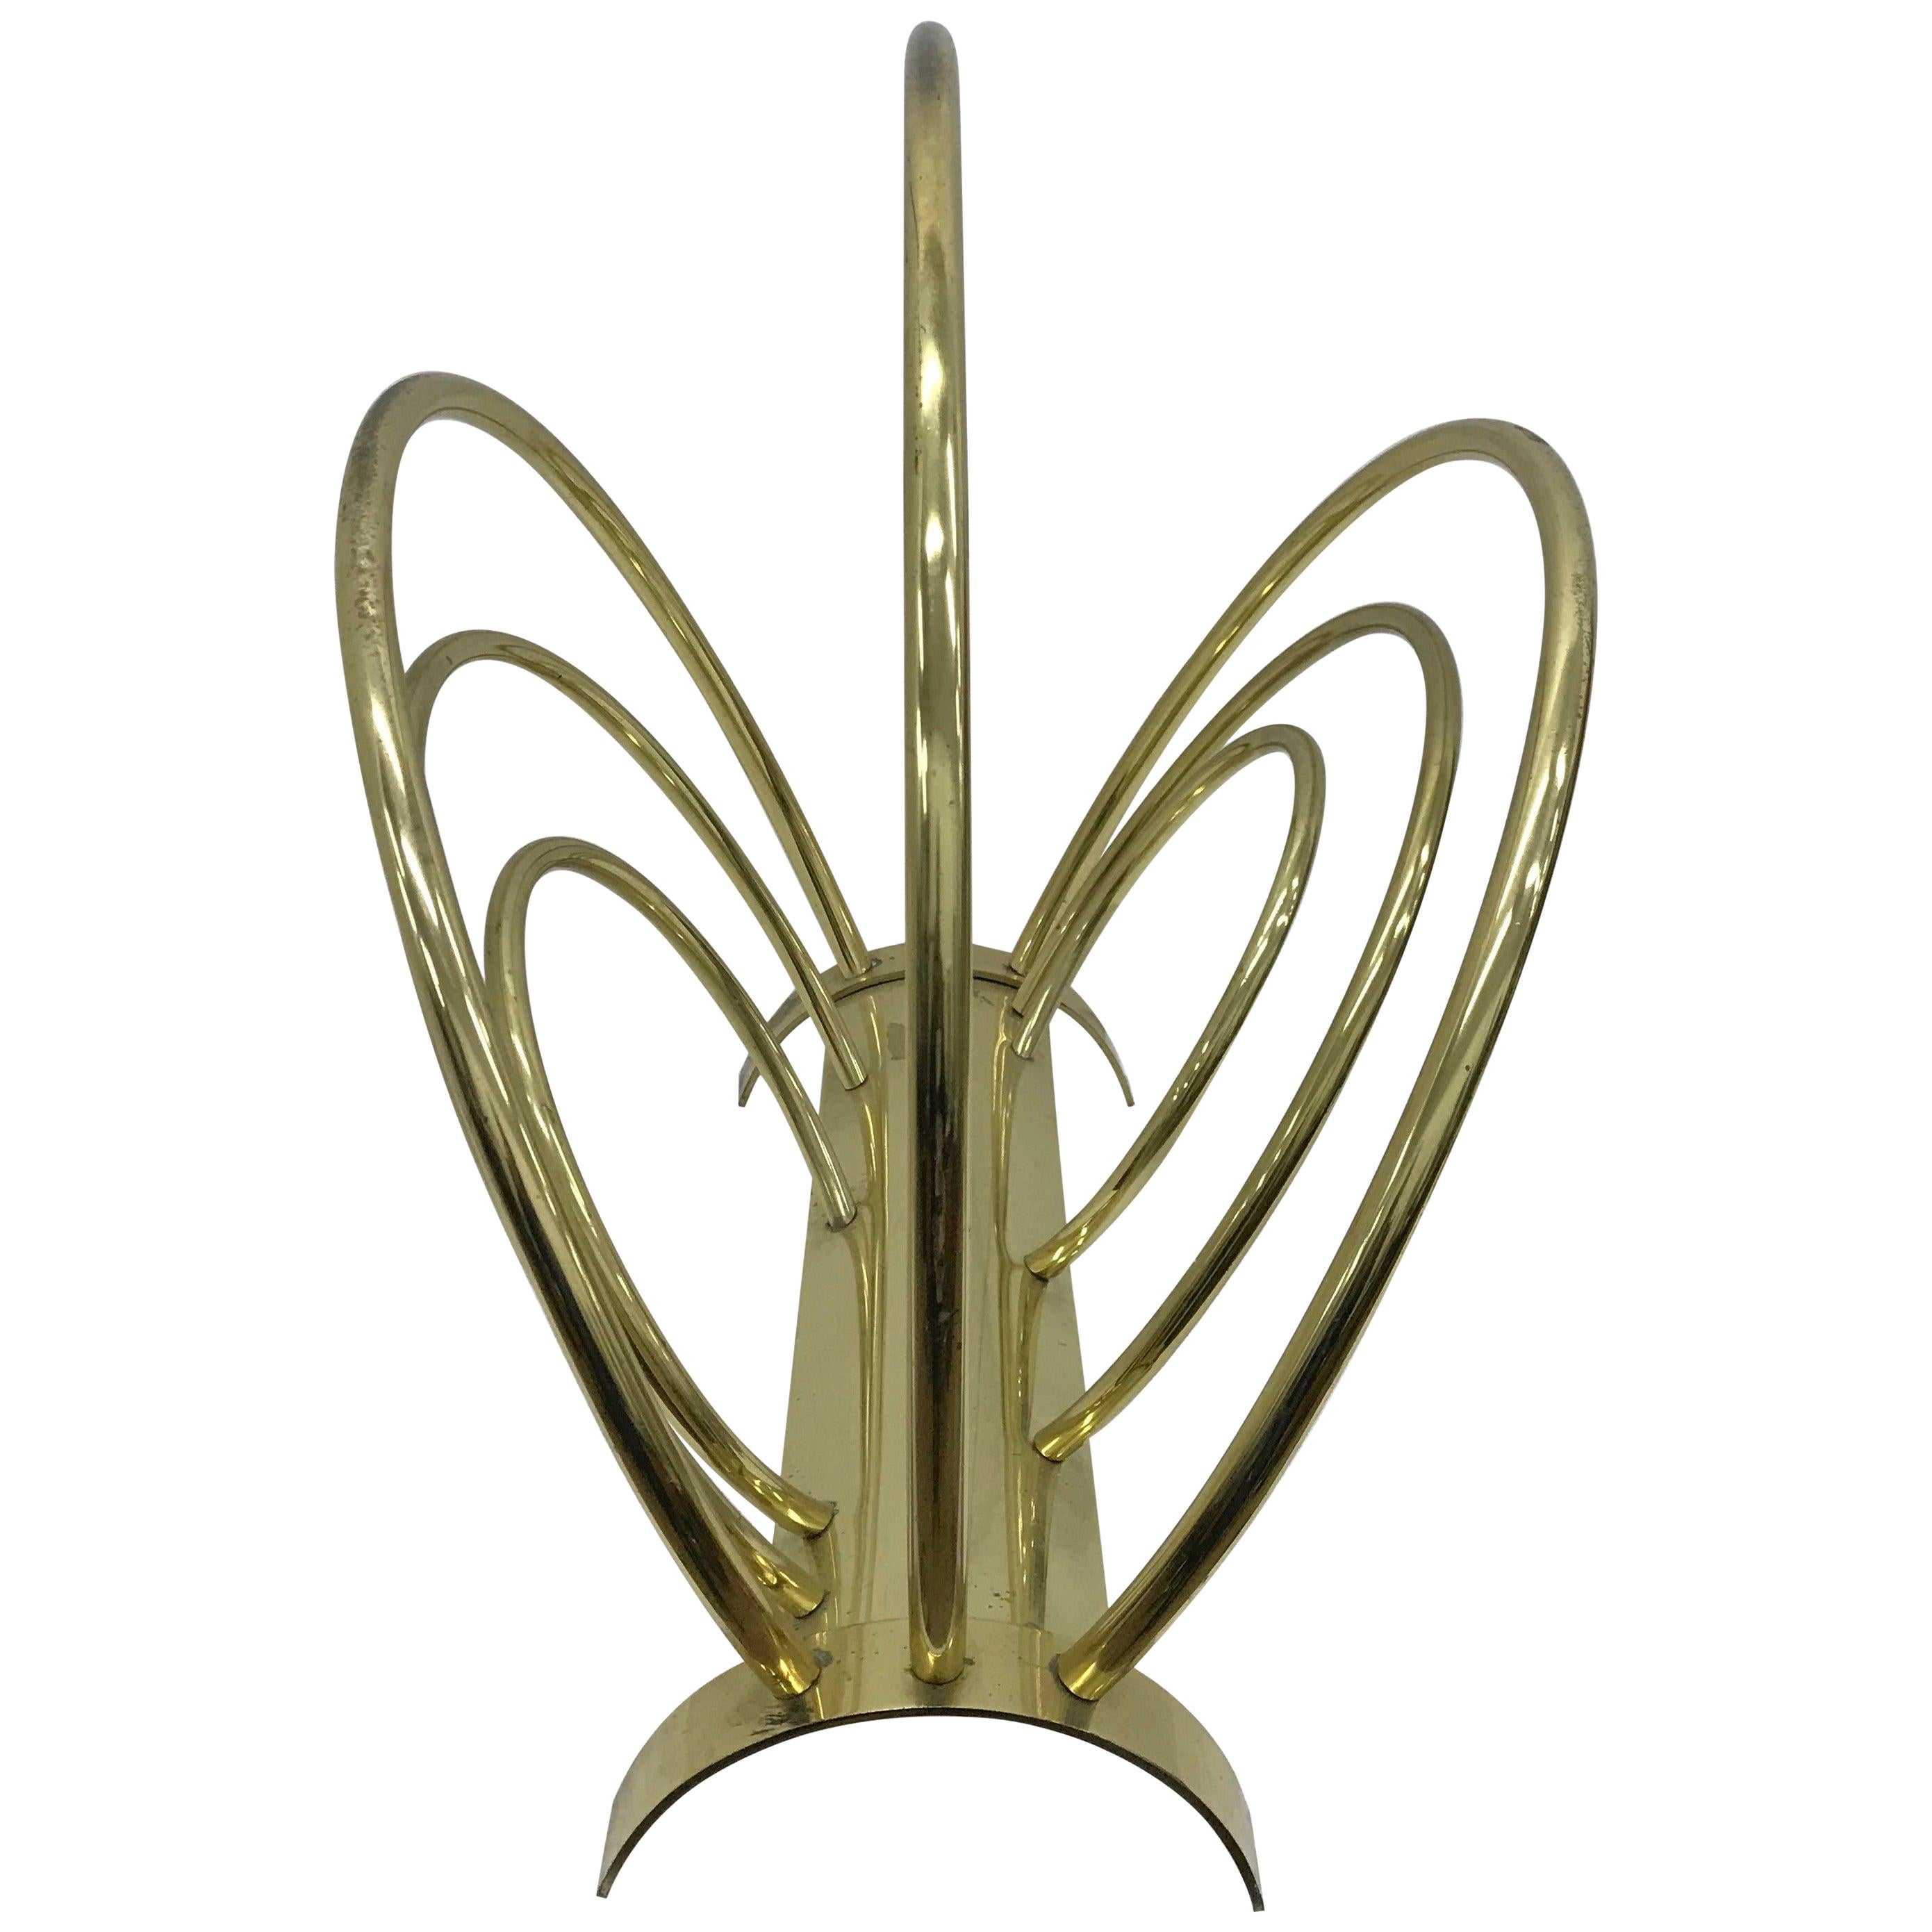 This is a brass magazine rack designed and manufactured in Italy in the 1950s, good conditions overall, brass is in original patina.
This Italian Magazine it's a stylish and functional piece of furniture that embodies the design sensibilities of the